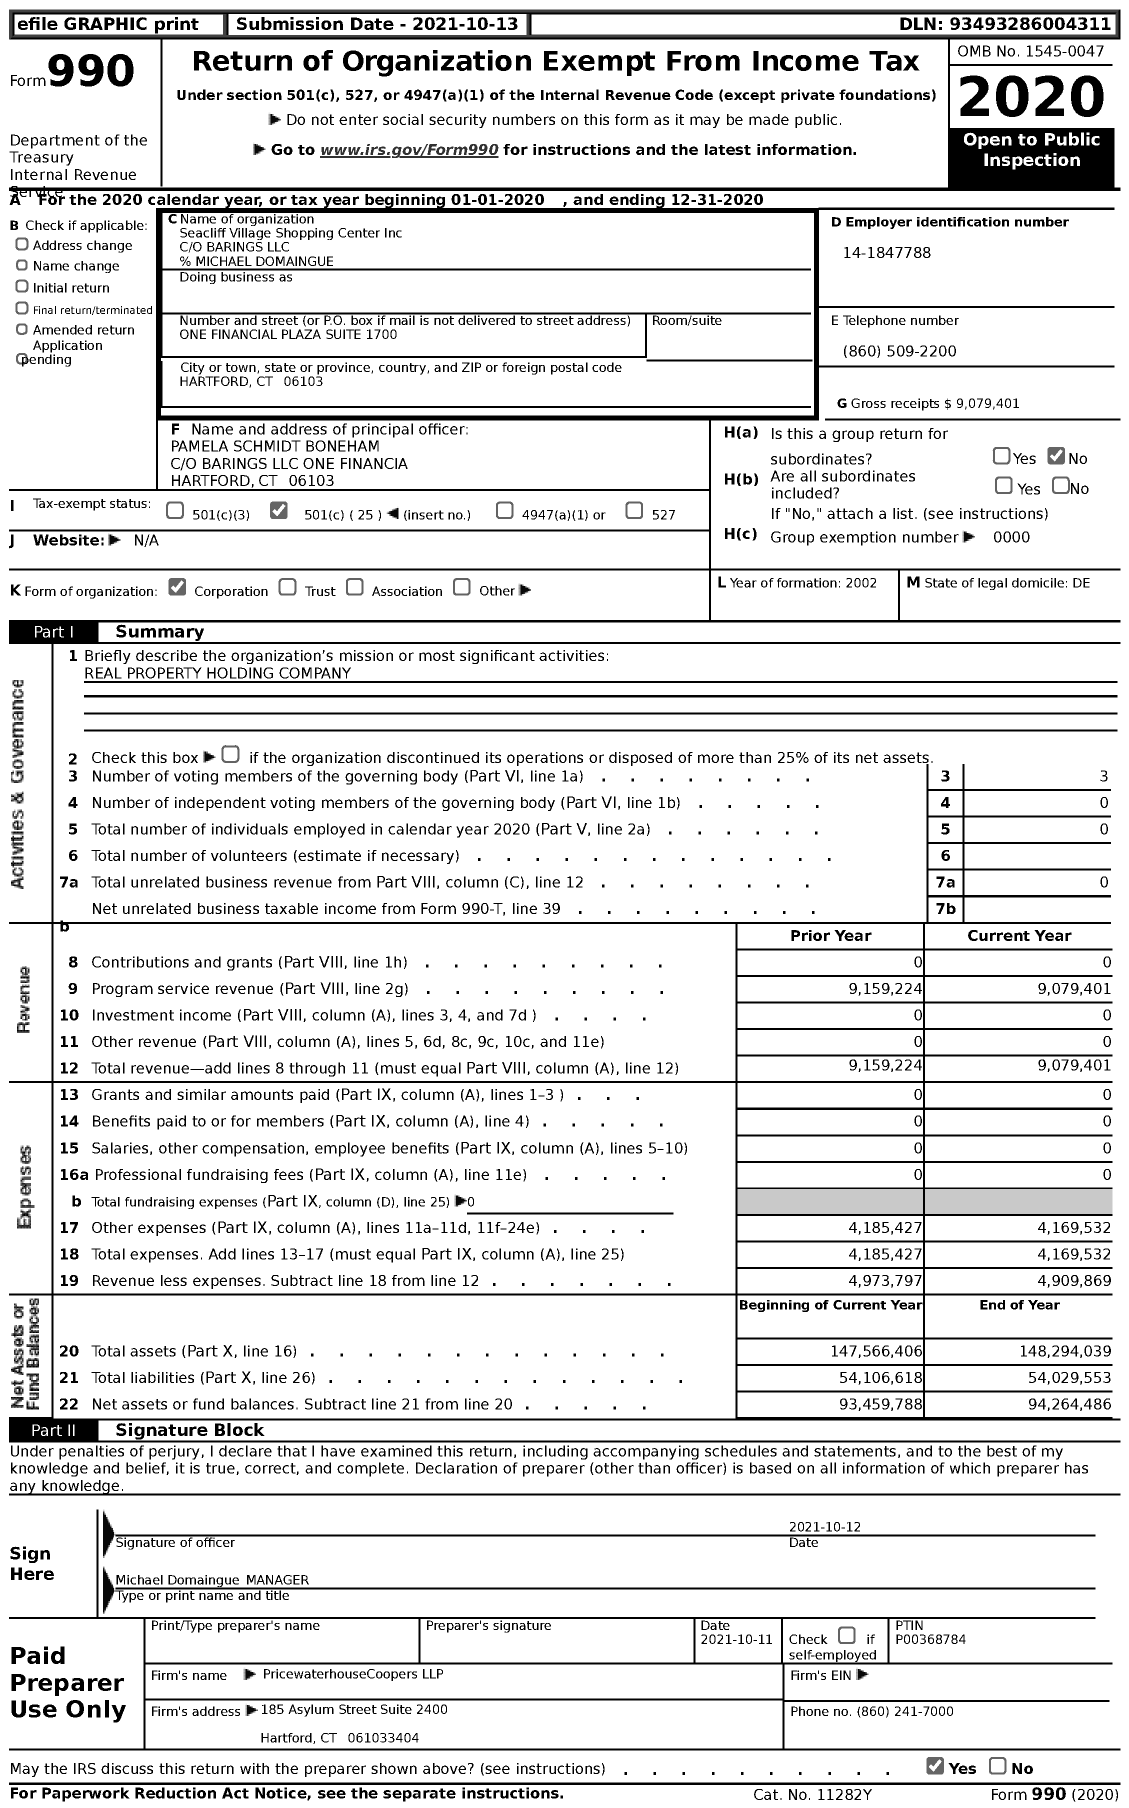 Image of first page of 2020 Form 990 for Seacliff Village Shopping Center